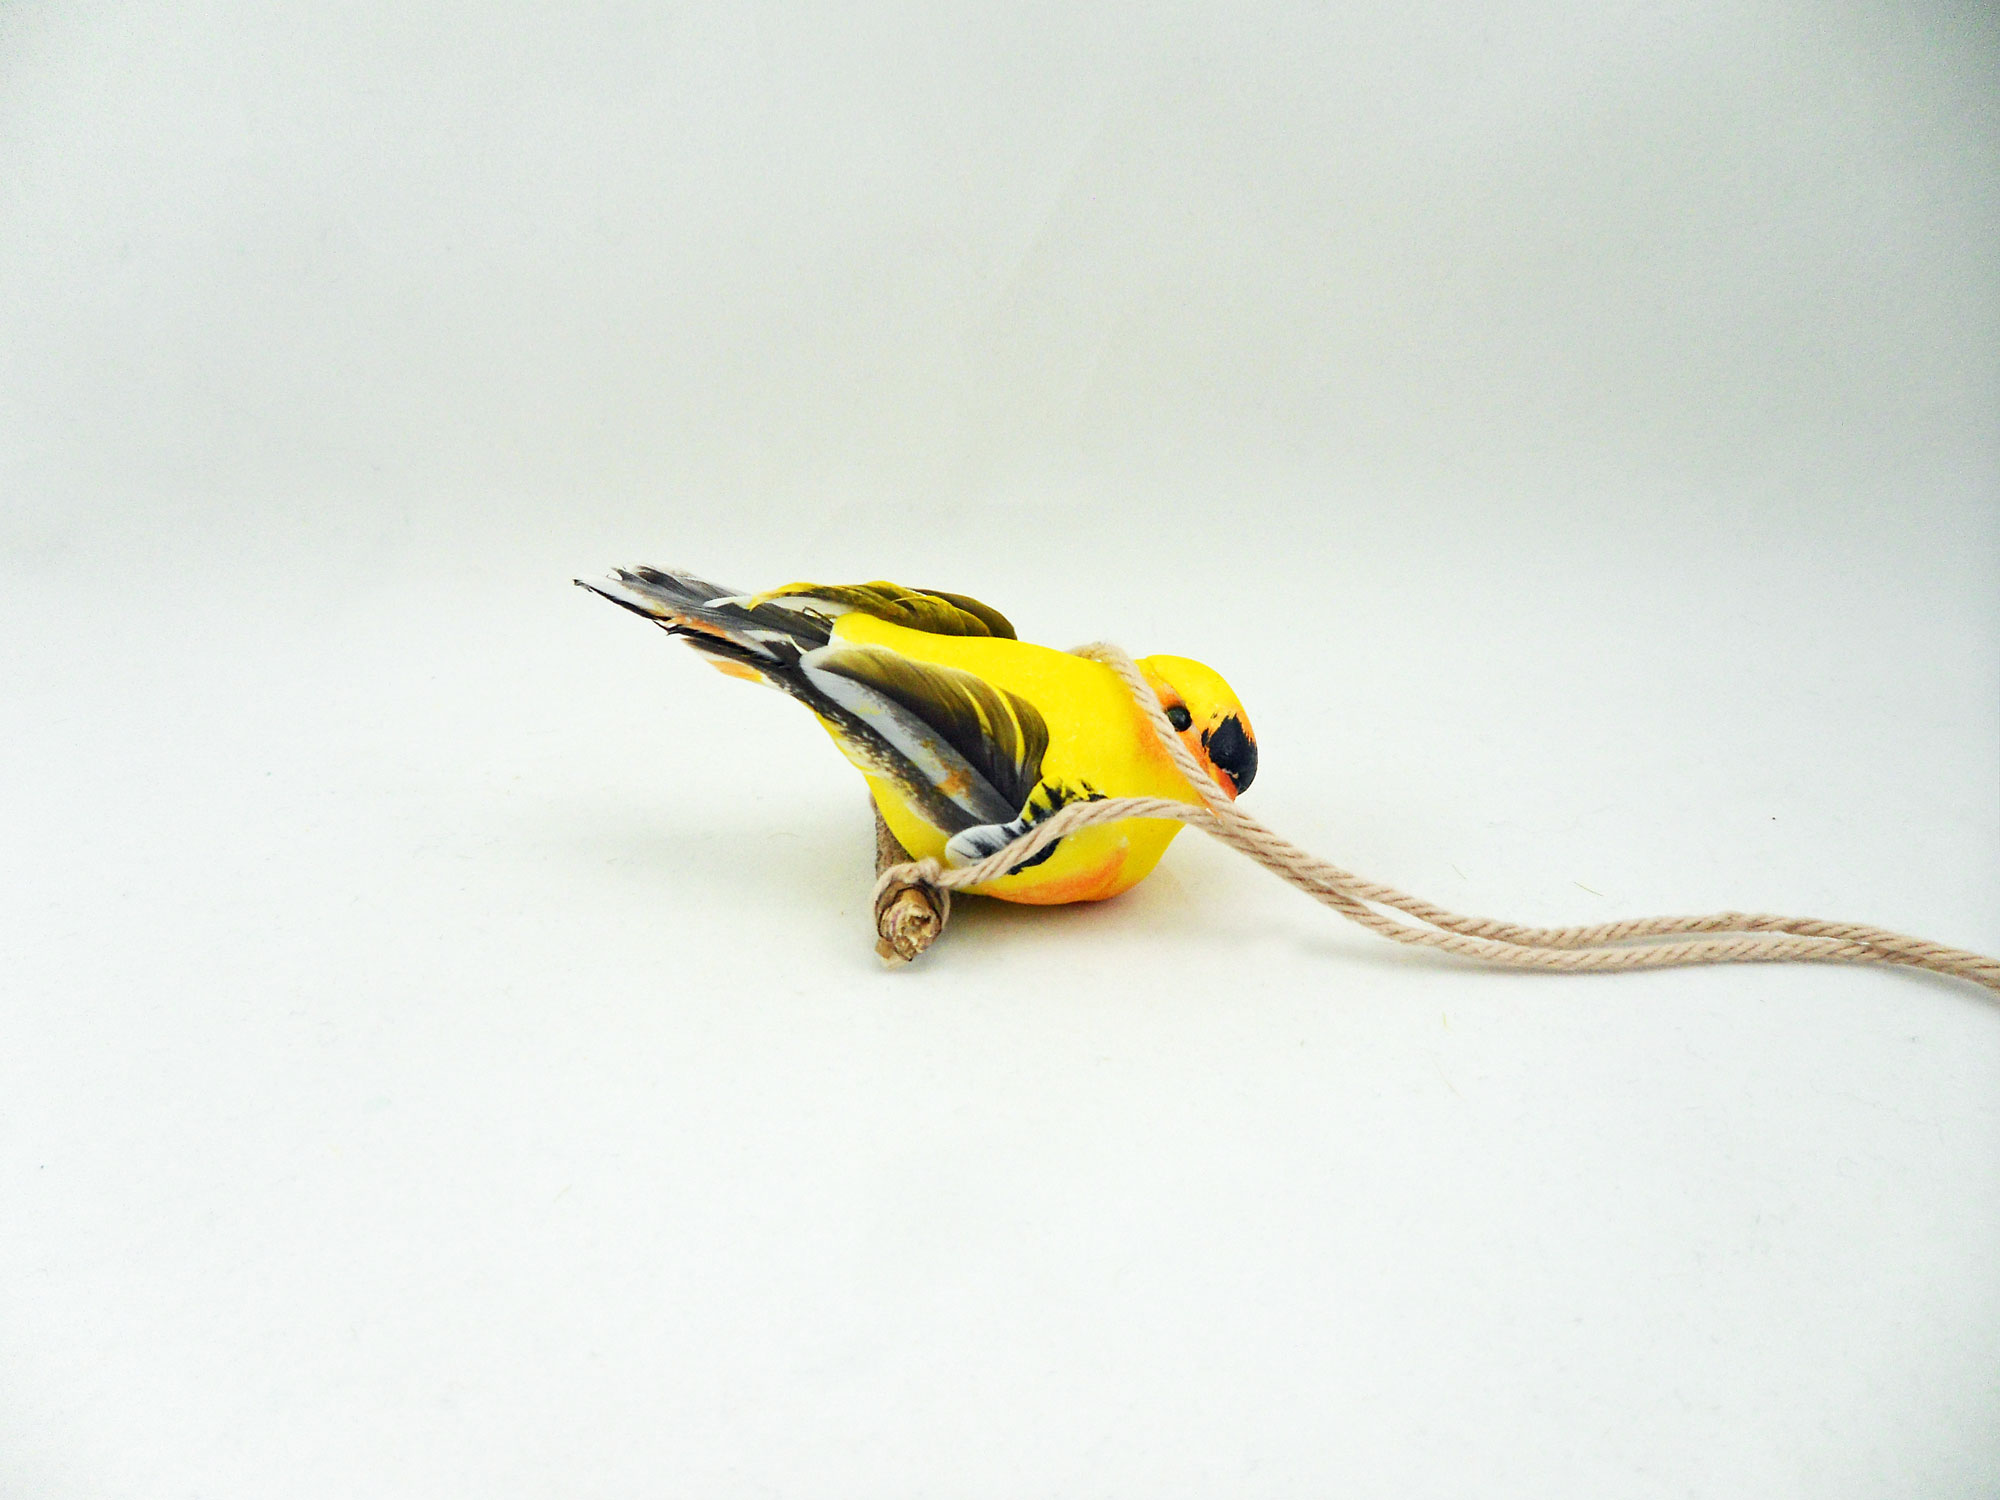 Step 6 is to glue the bird to the perch | OrnamentShop.com